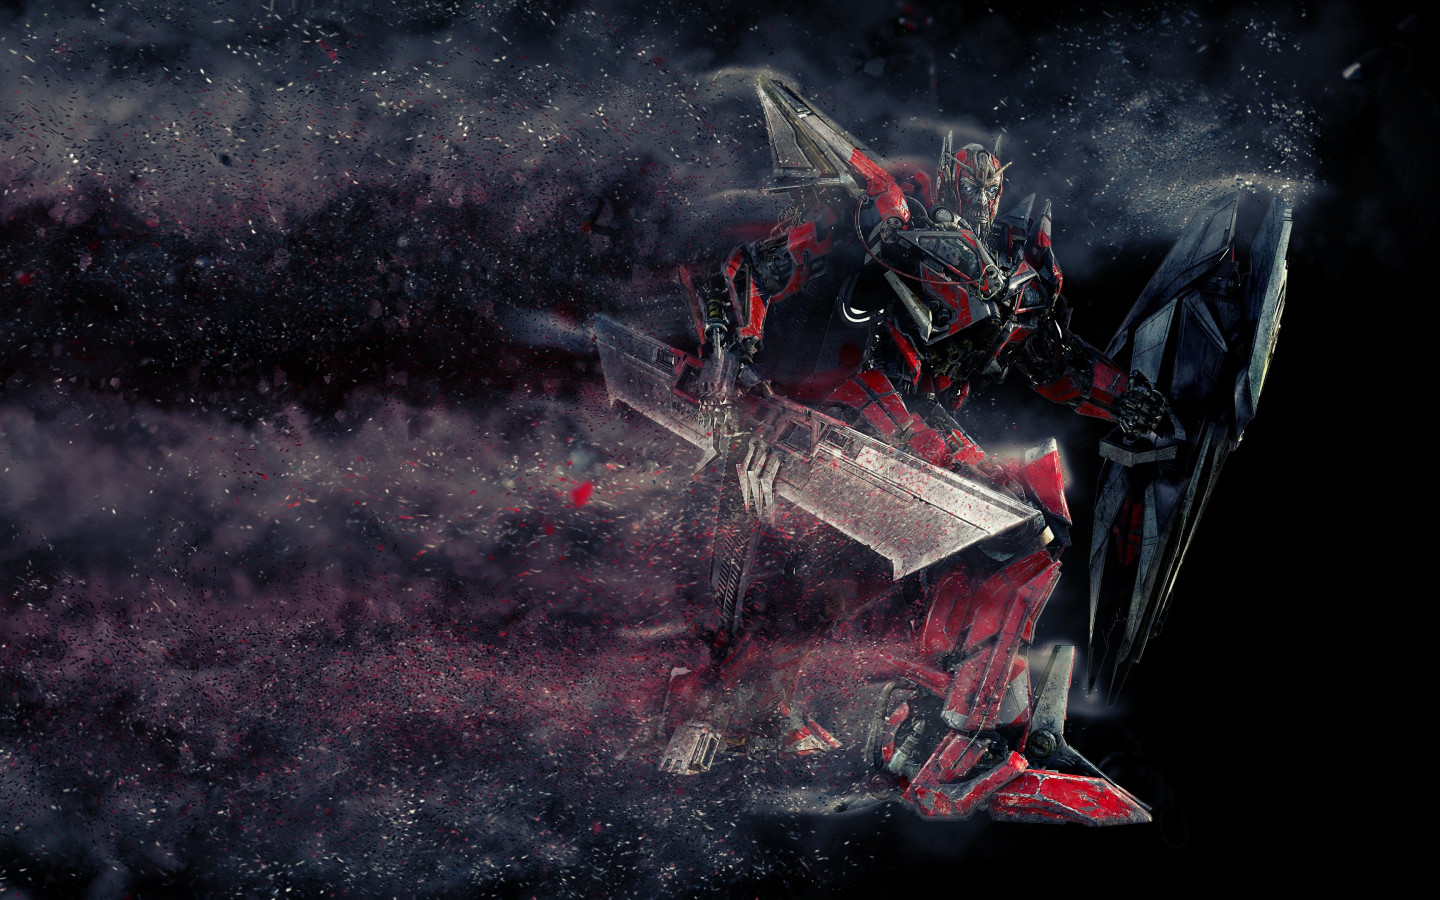 Sentinel Prime from Transformers wallpaper 1440x900